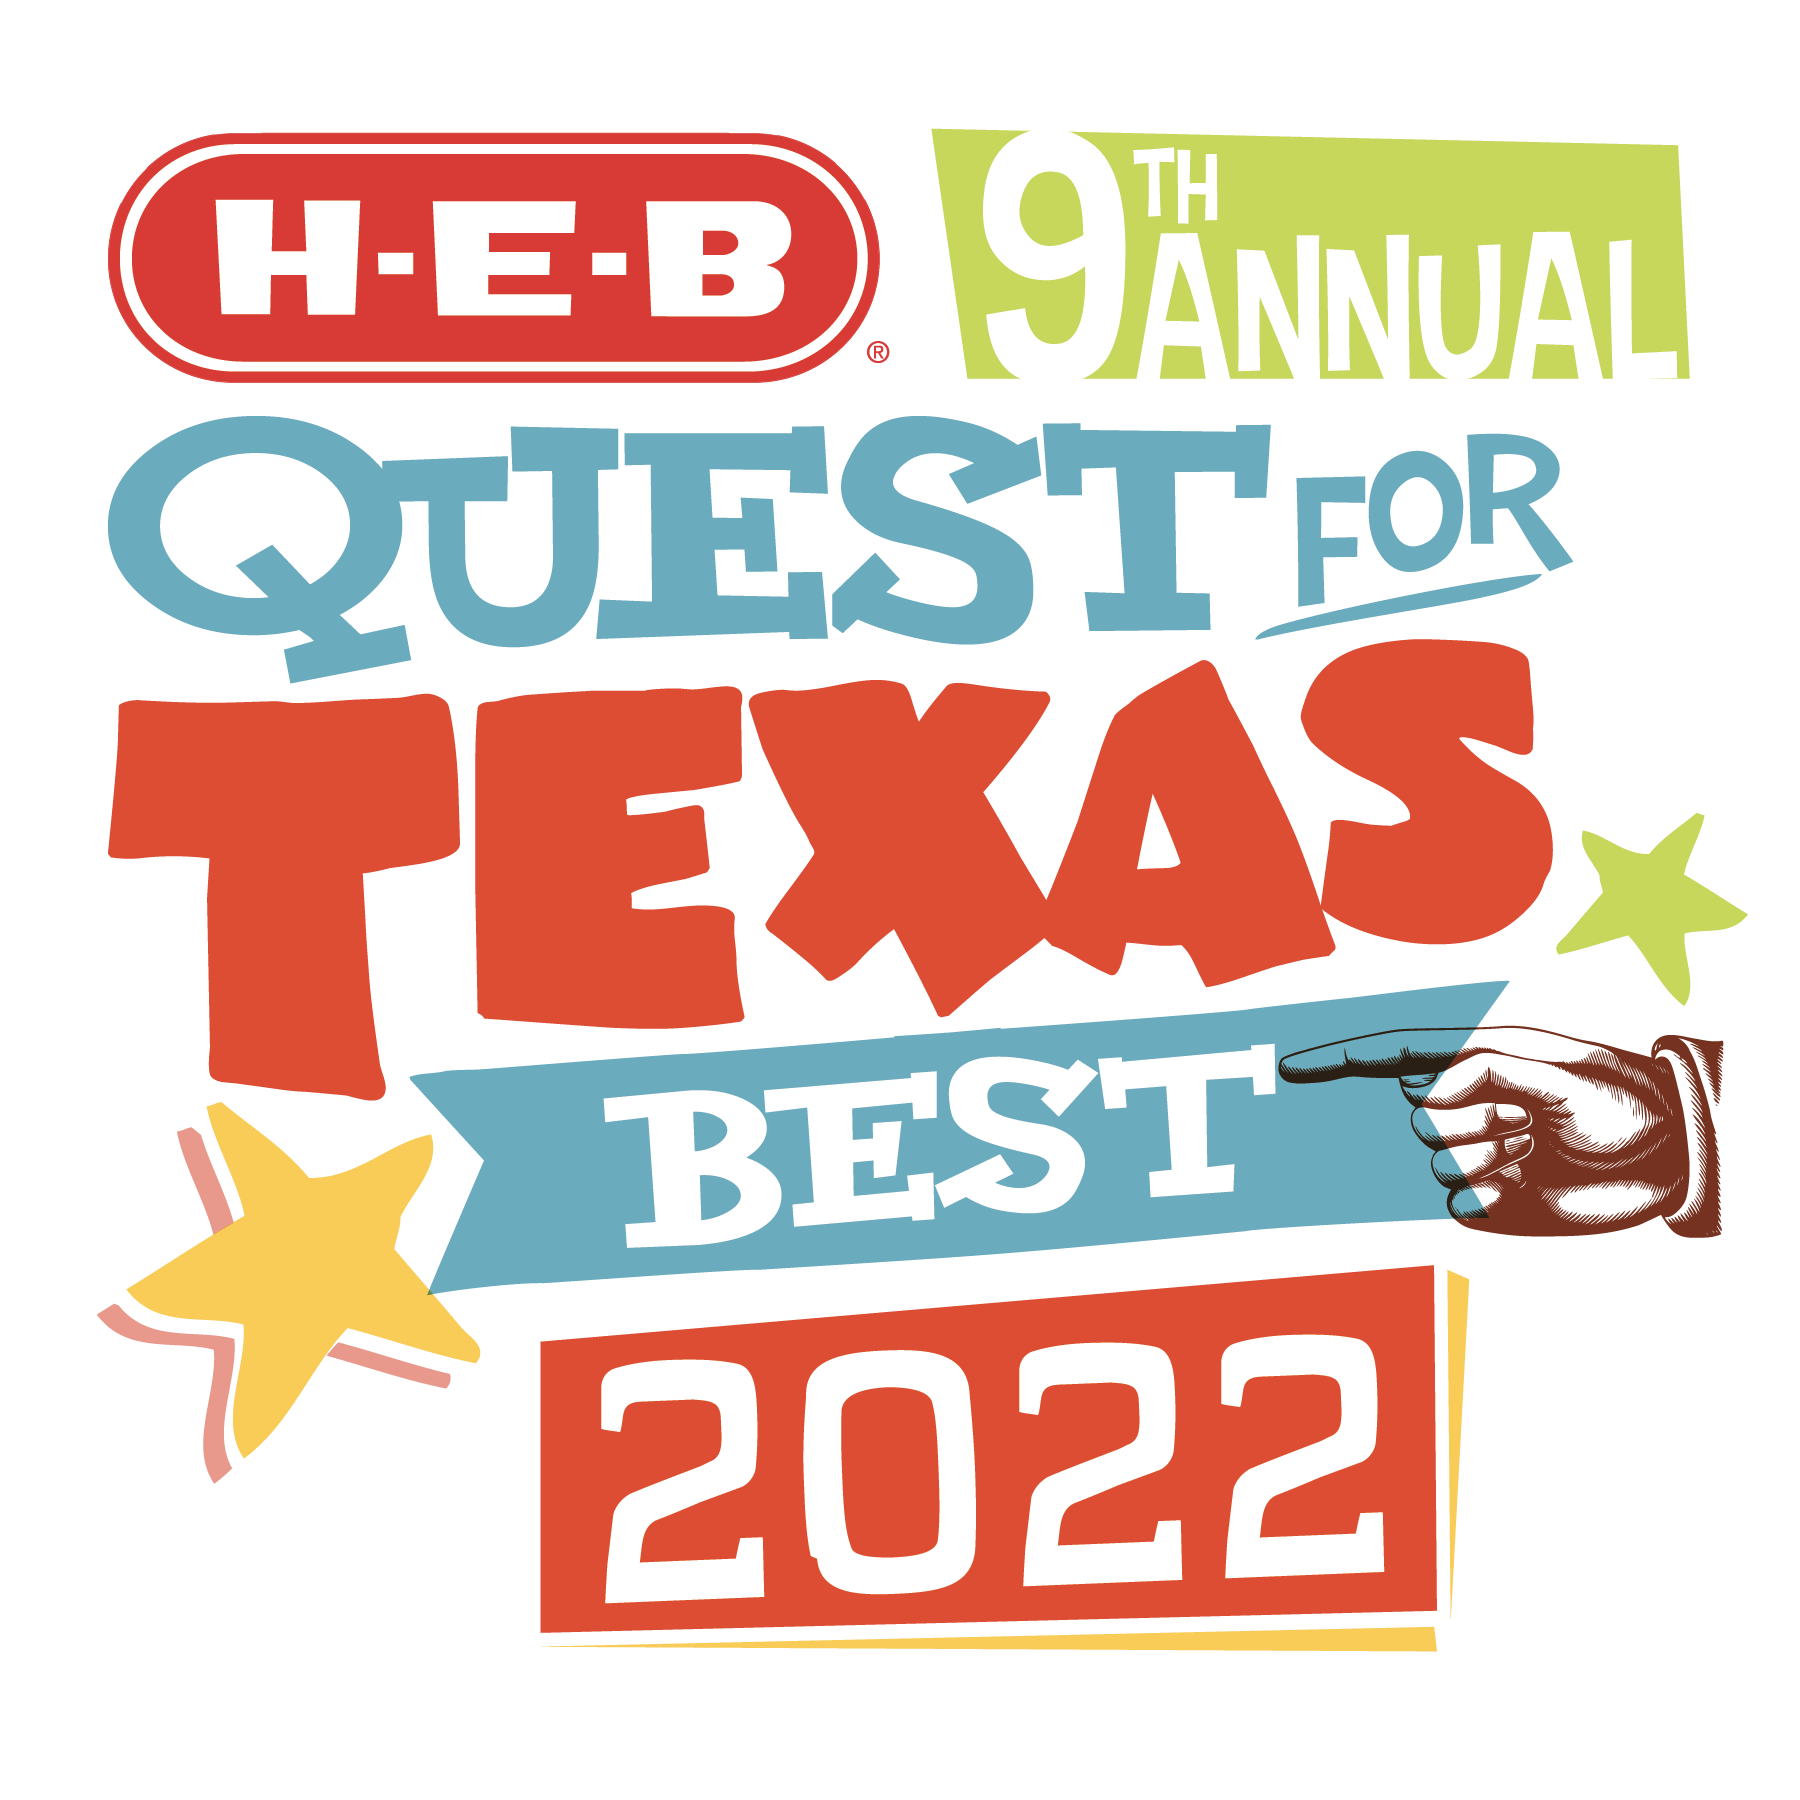 Heb Calendar 2022 H-E-B Issues Texas-Wide Call For Entries In 2022 Quest For Texas Best  Competition - H-E-B Newsroom